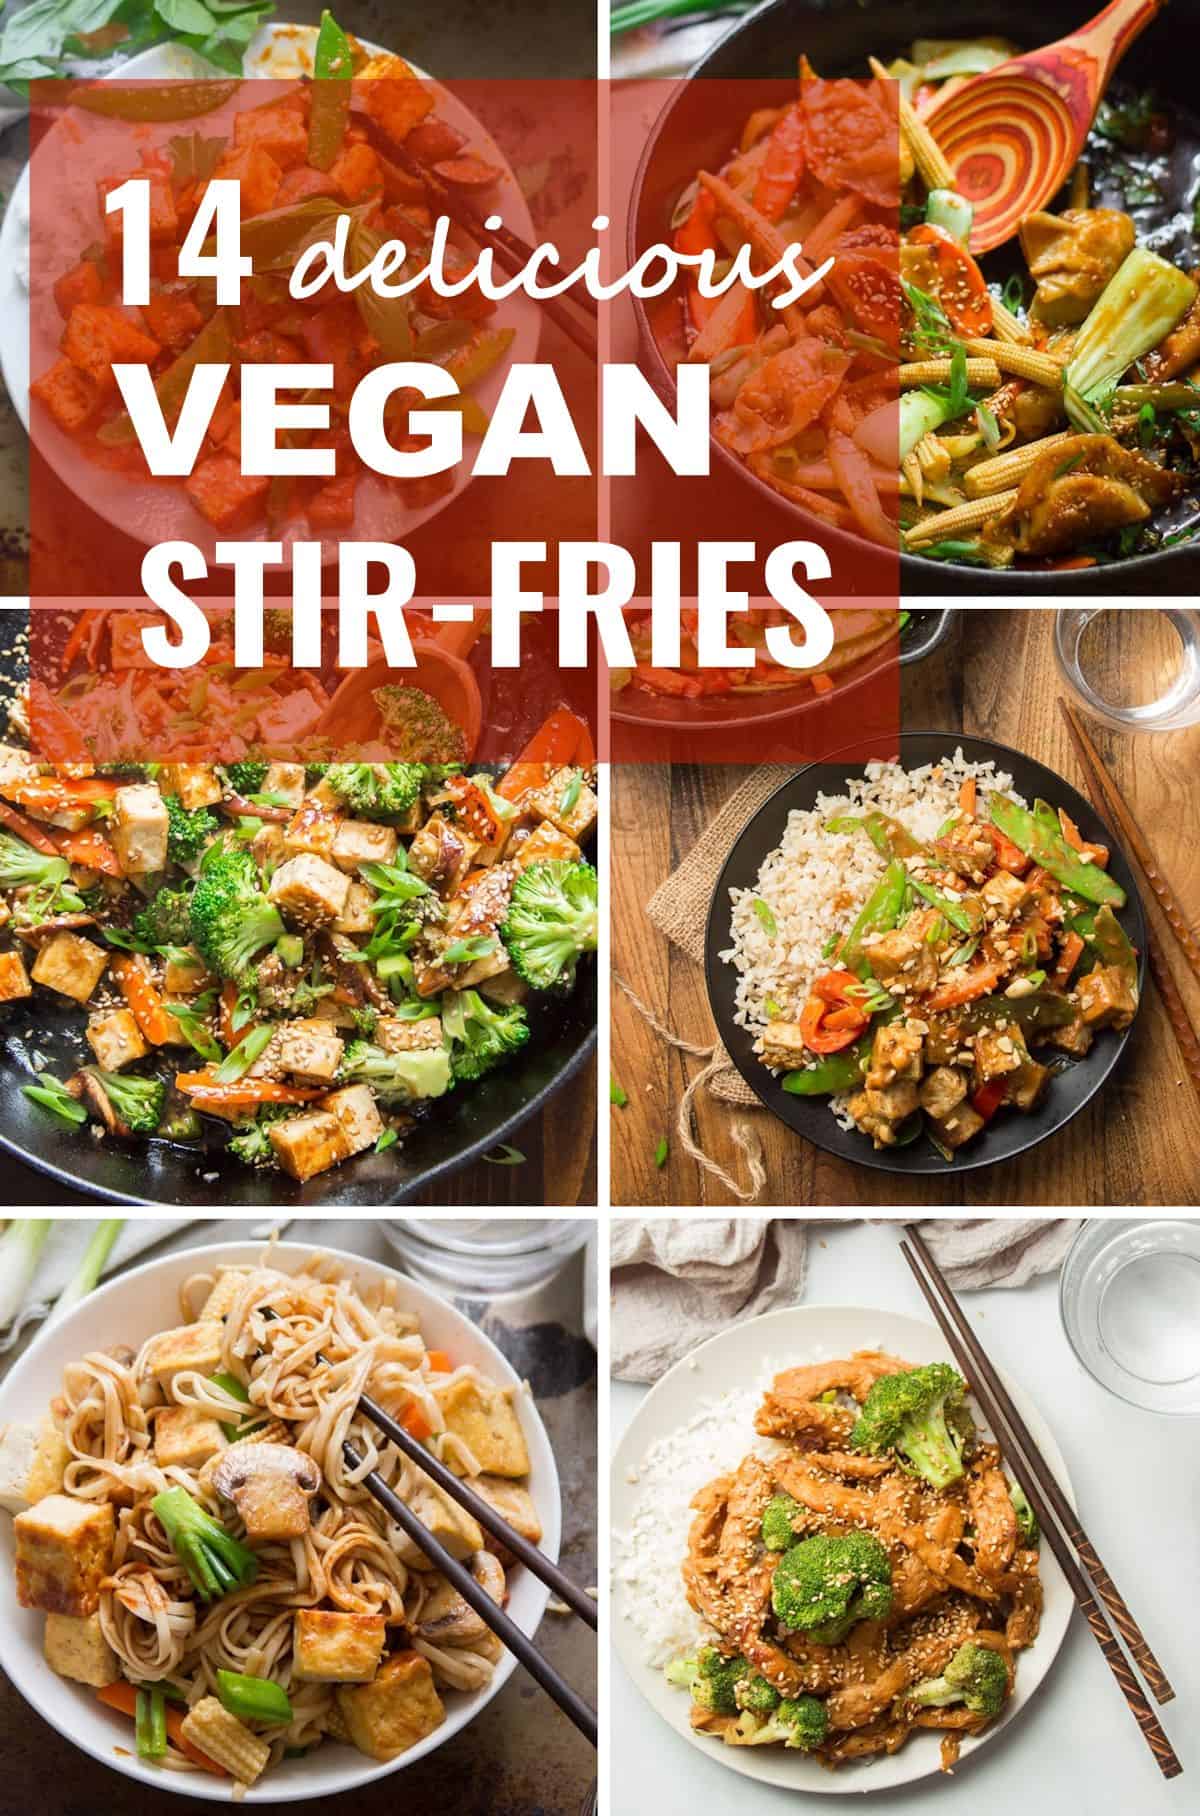 Collage Showing Photos of Stir-Fries with Text Overlay Reading "14 Delicious Vegan Stir-Fries"